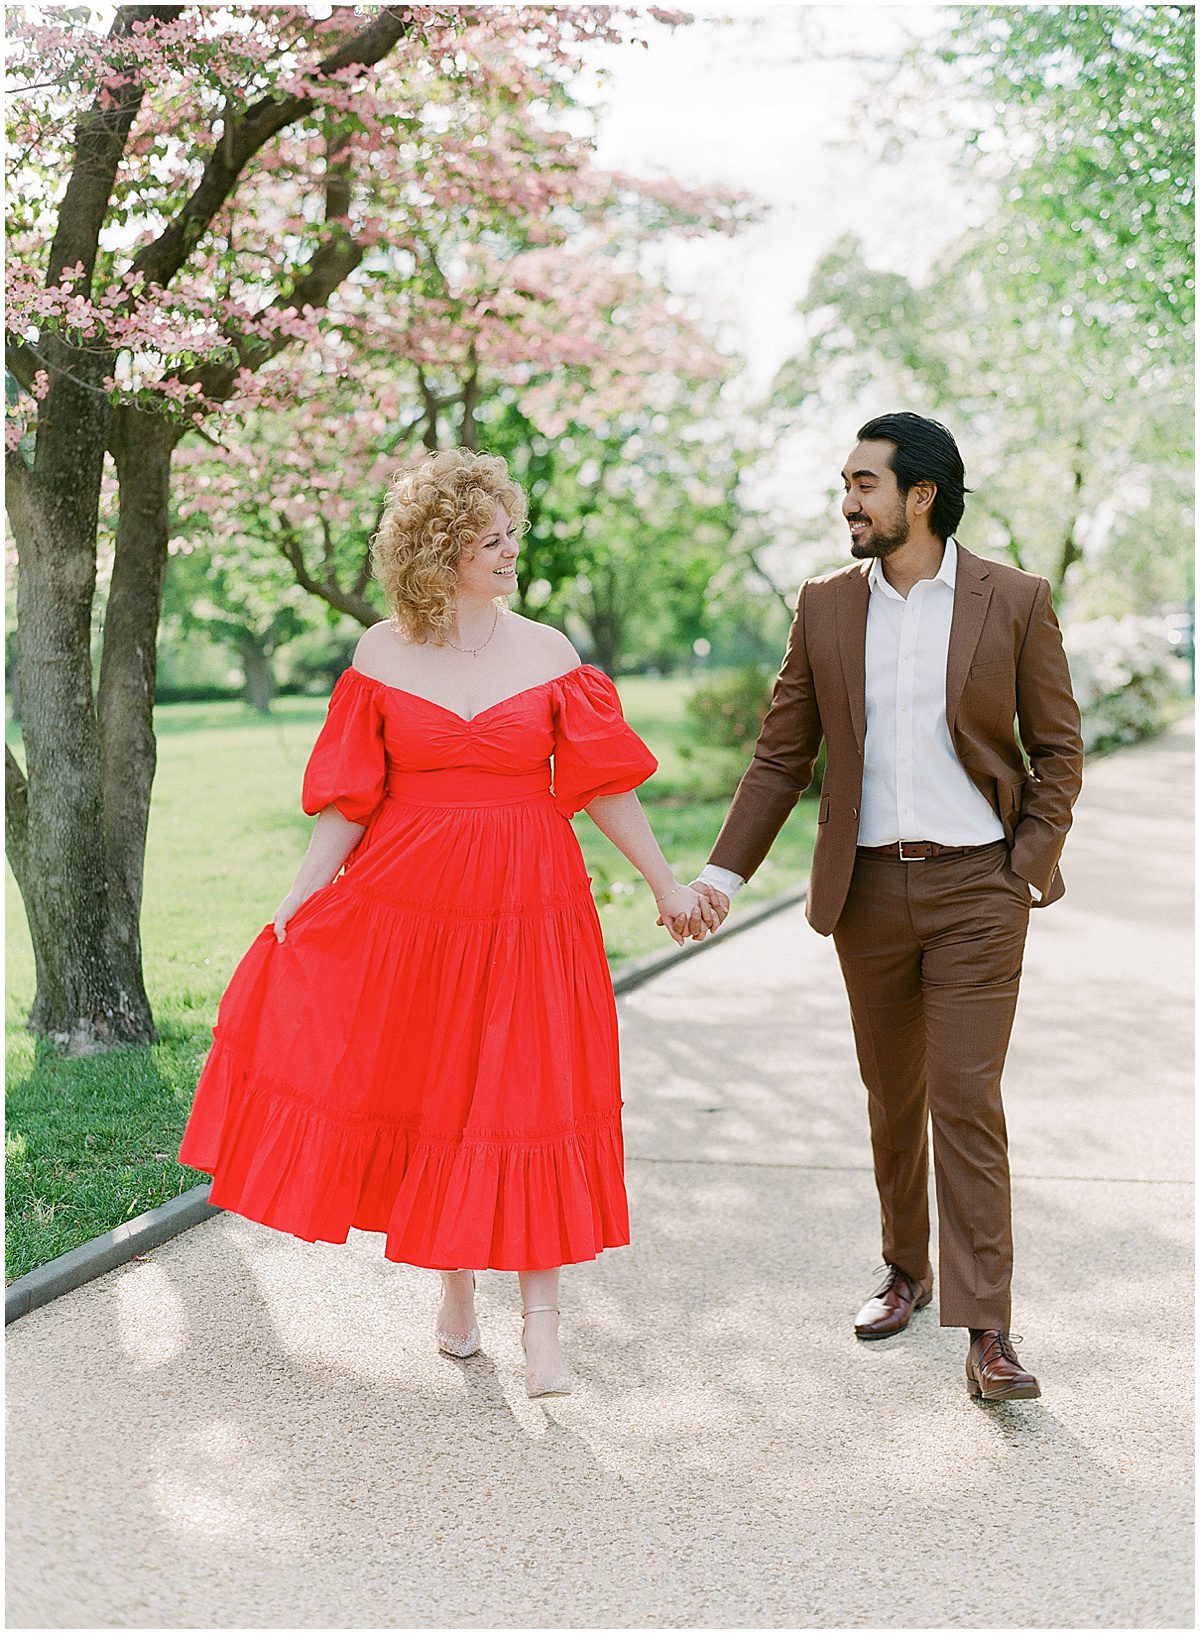 Couple Walking Holding Hands Her Wearing Red Dress He's Wearing Brown Suit Photo